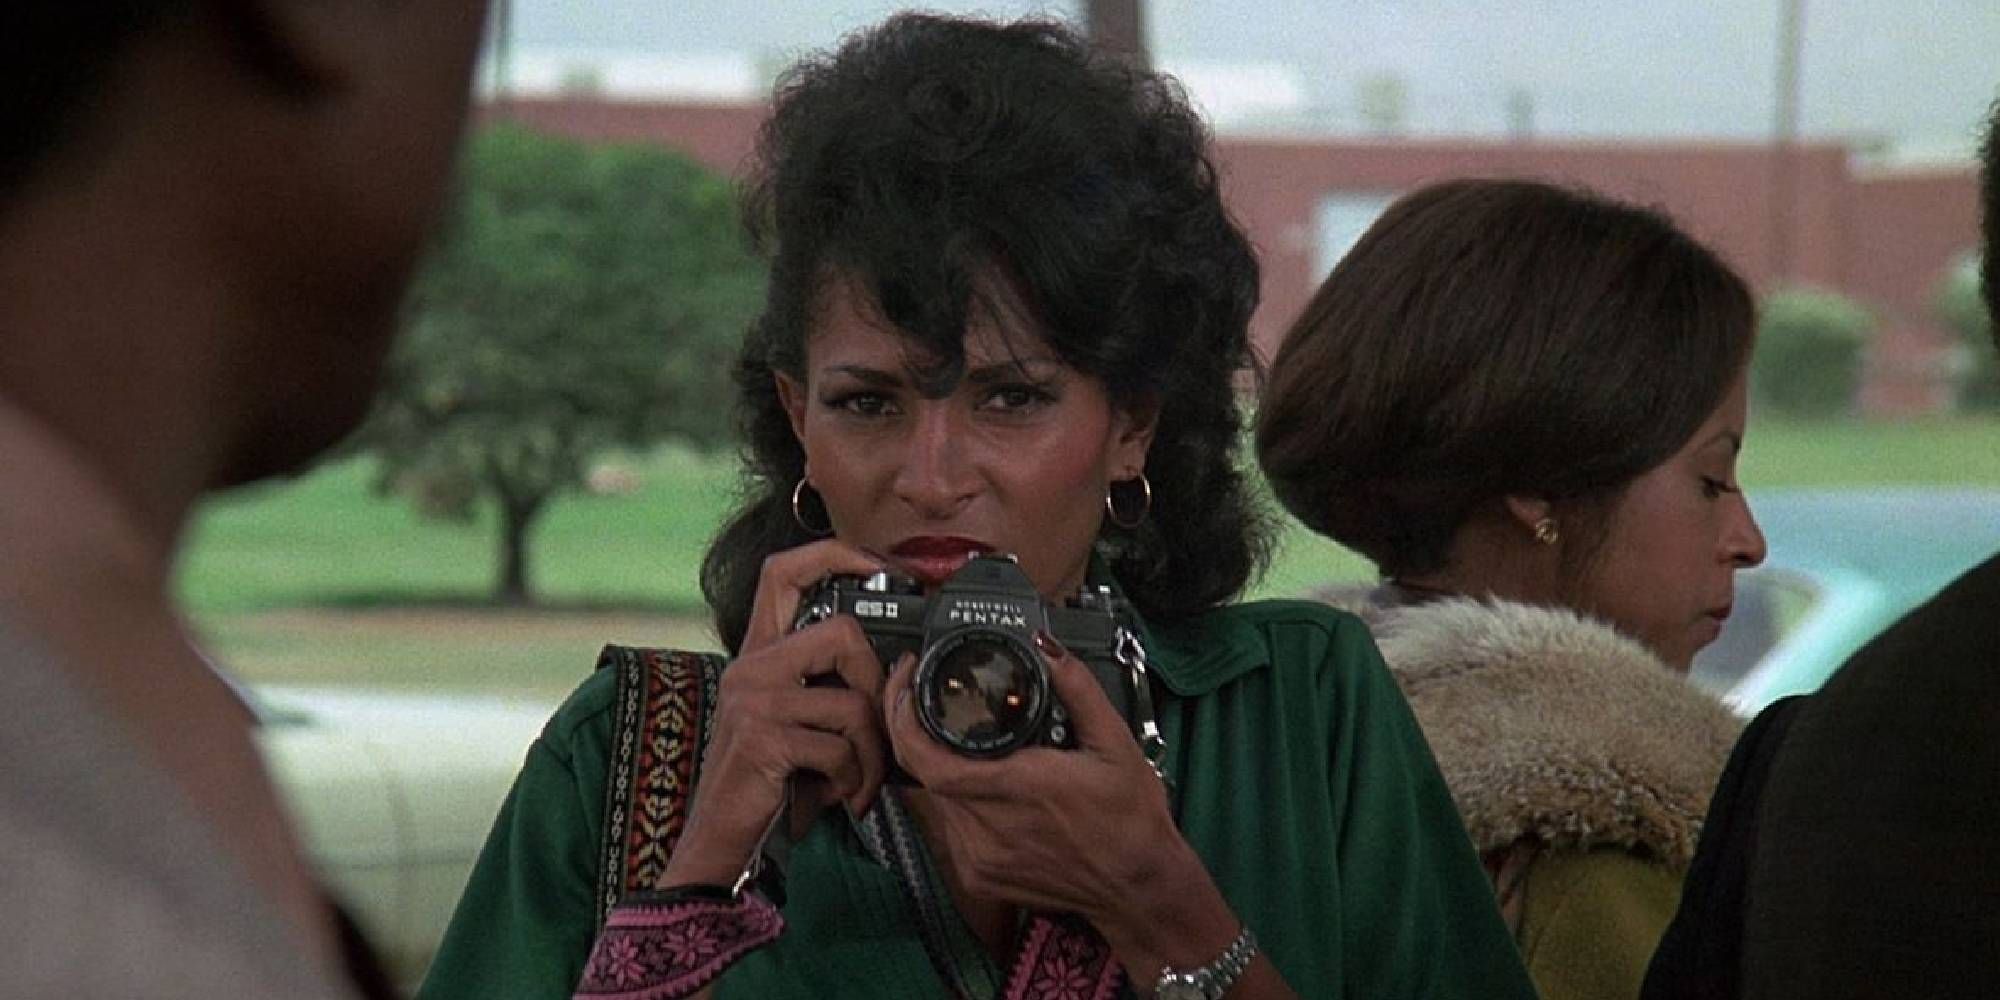 Pam Grier in Friday Foster holding a camera while looking at someone off-camera.